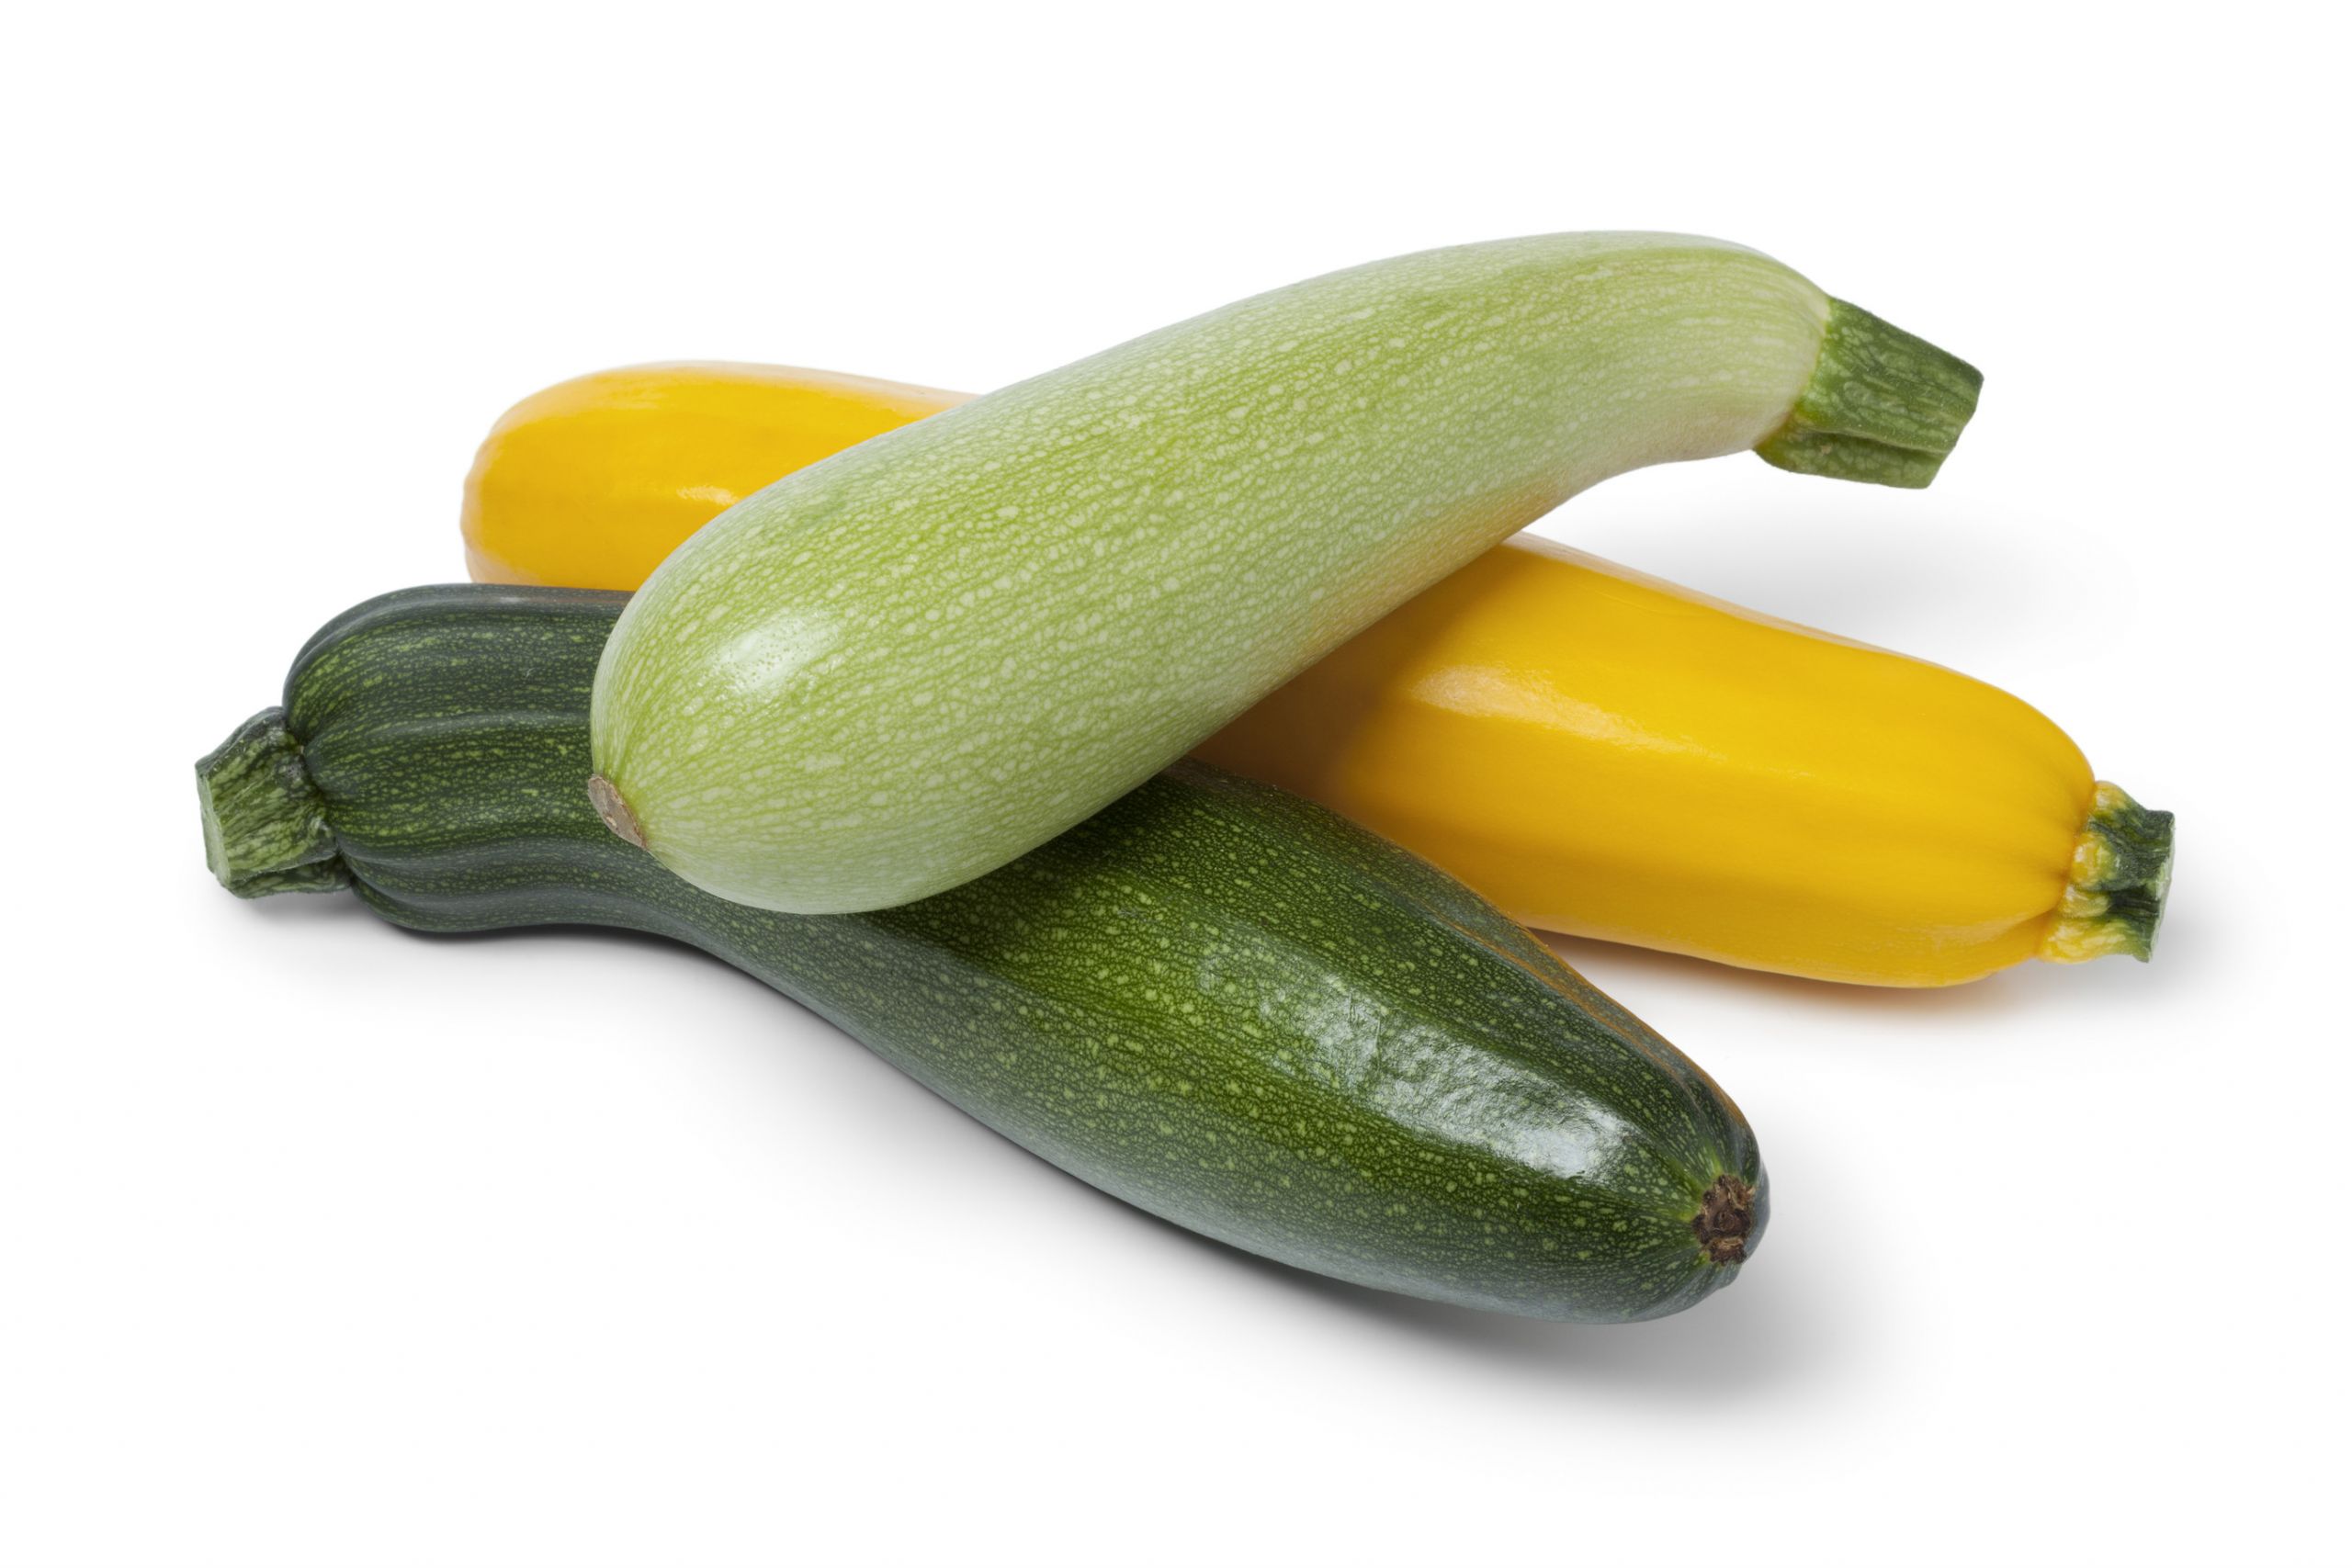 Fiber In Zucchini
 Ten Awesome Ways to Make Use of Your Zucchini